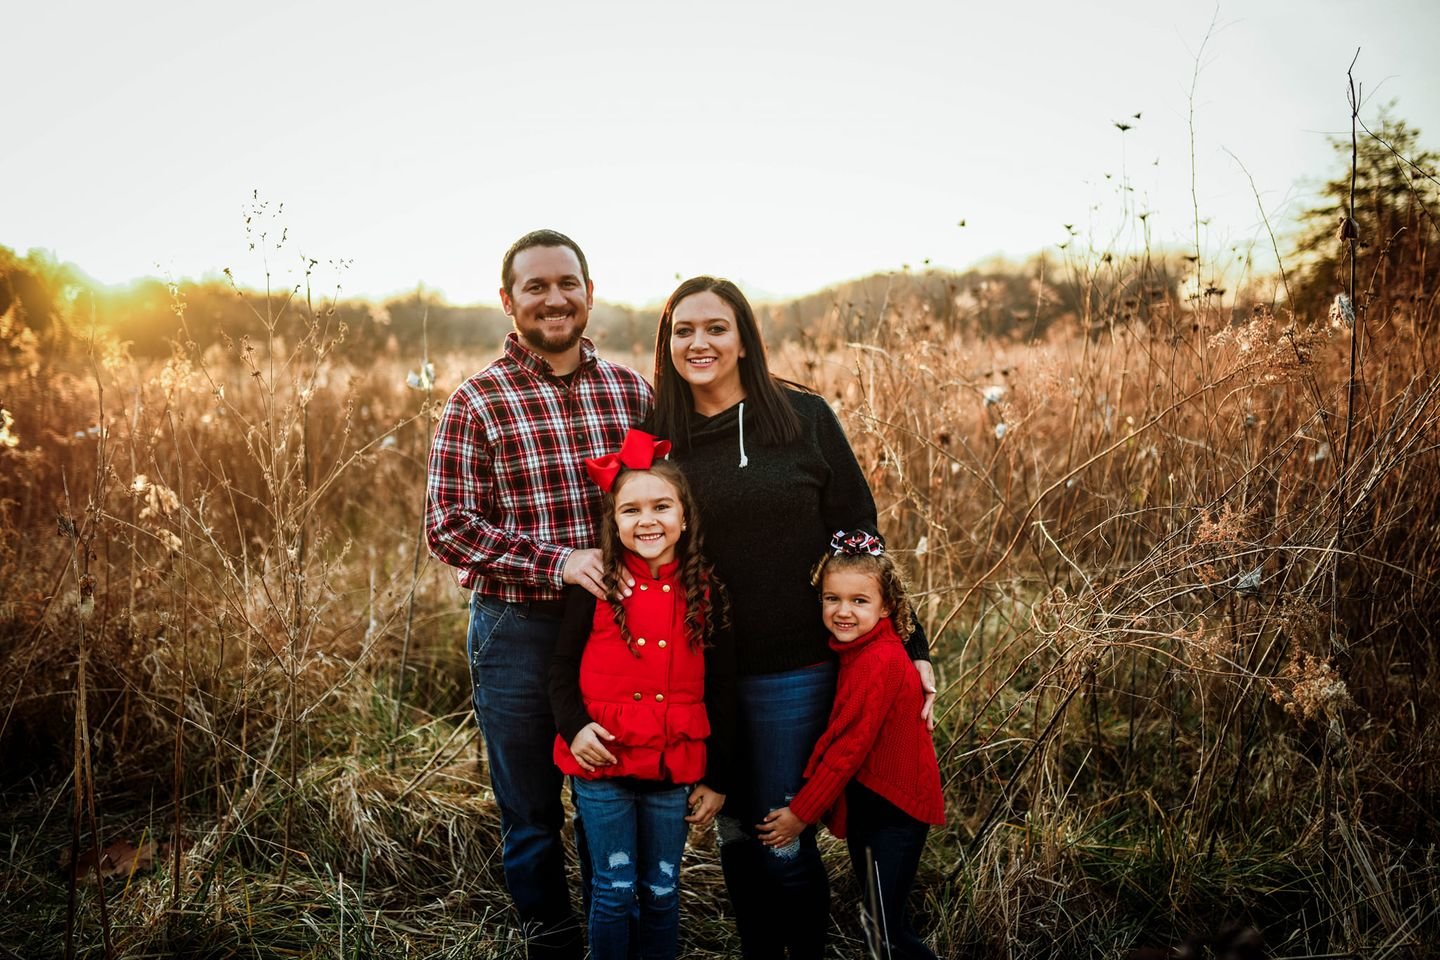 Georgia Hearn, program director for Anne’s Anchor in Bowling Green, her husband, Cody, and their daughters pose for a family photo.